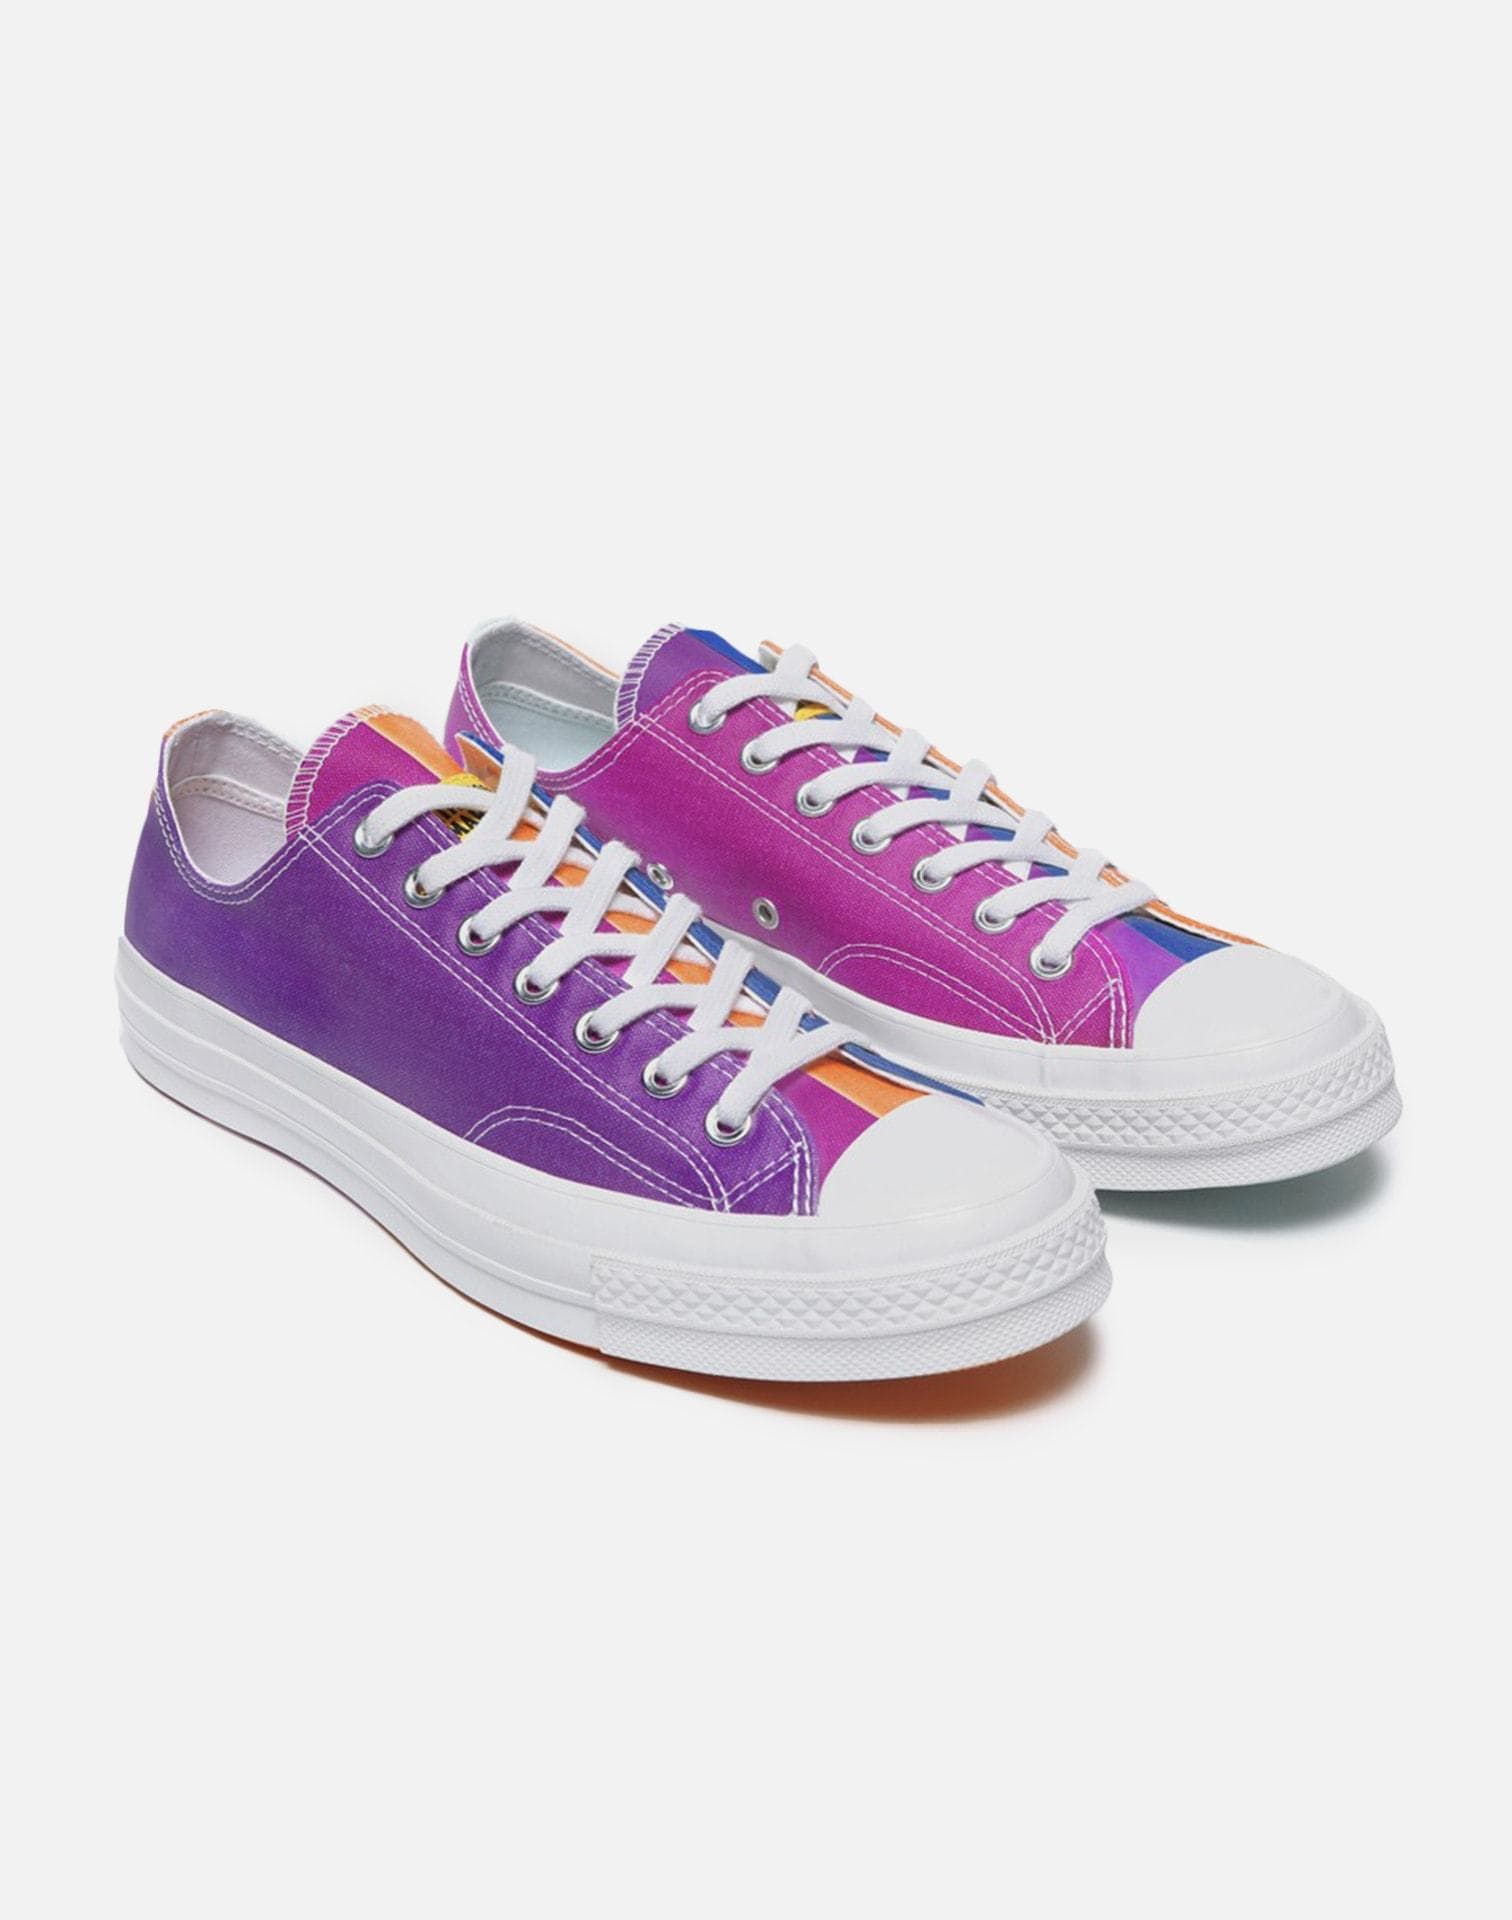 Converse x Chinatown Market Men's Chuck Taylor All-Star 70 Low